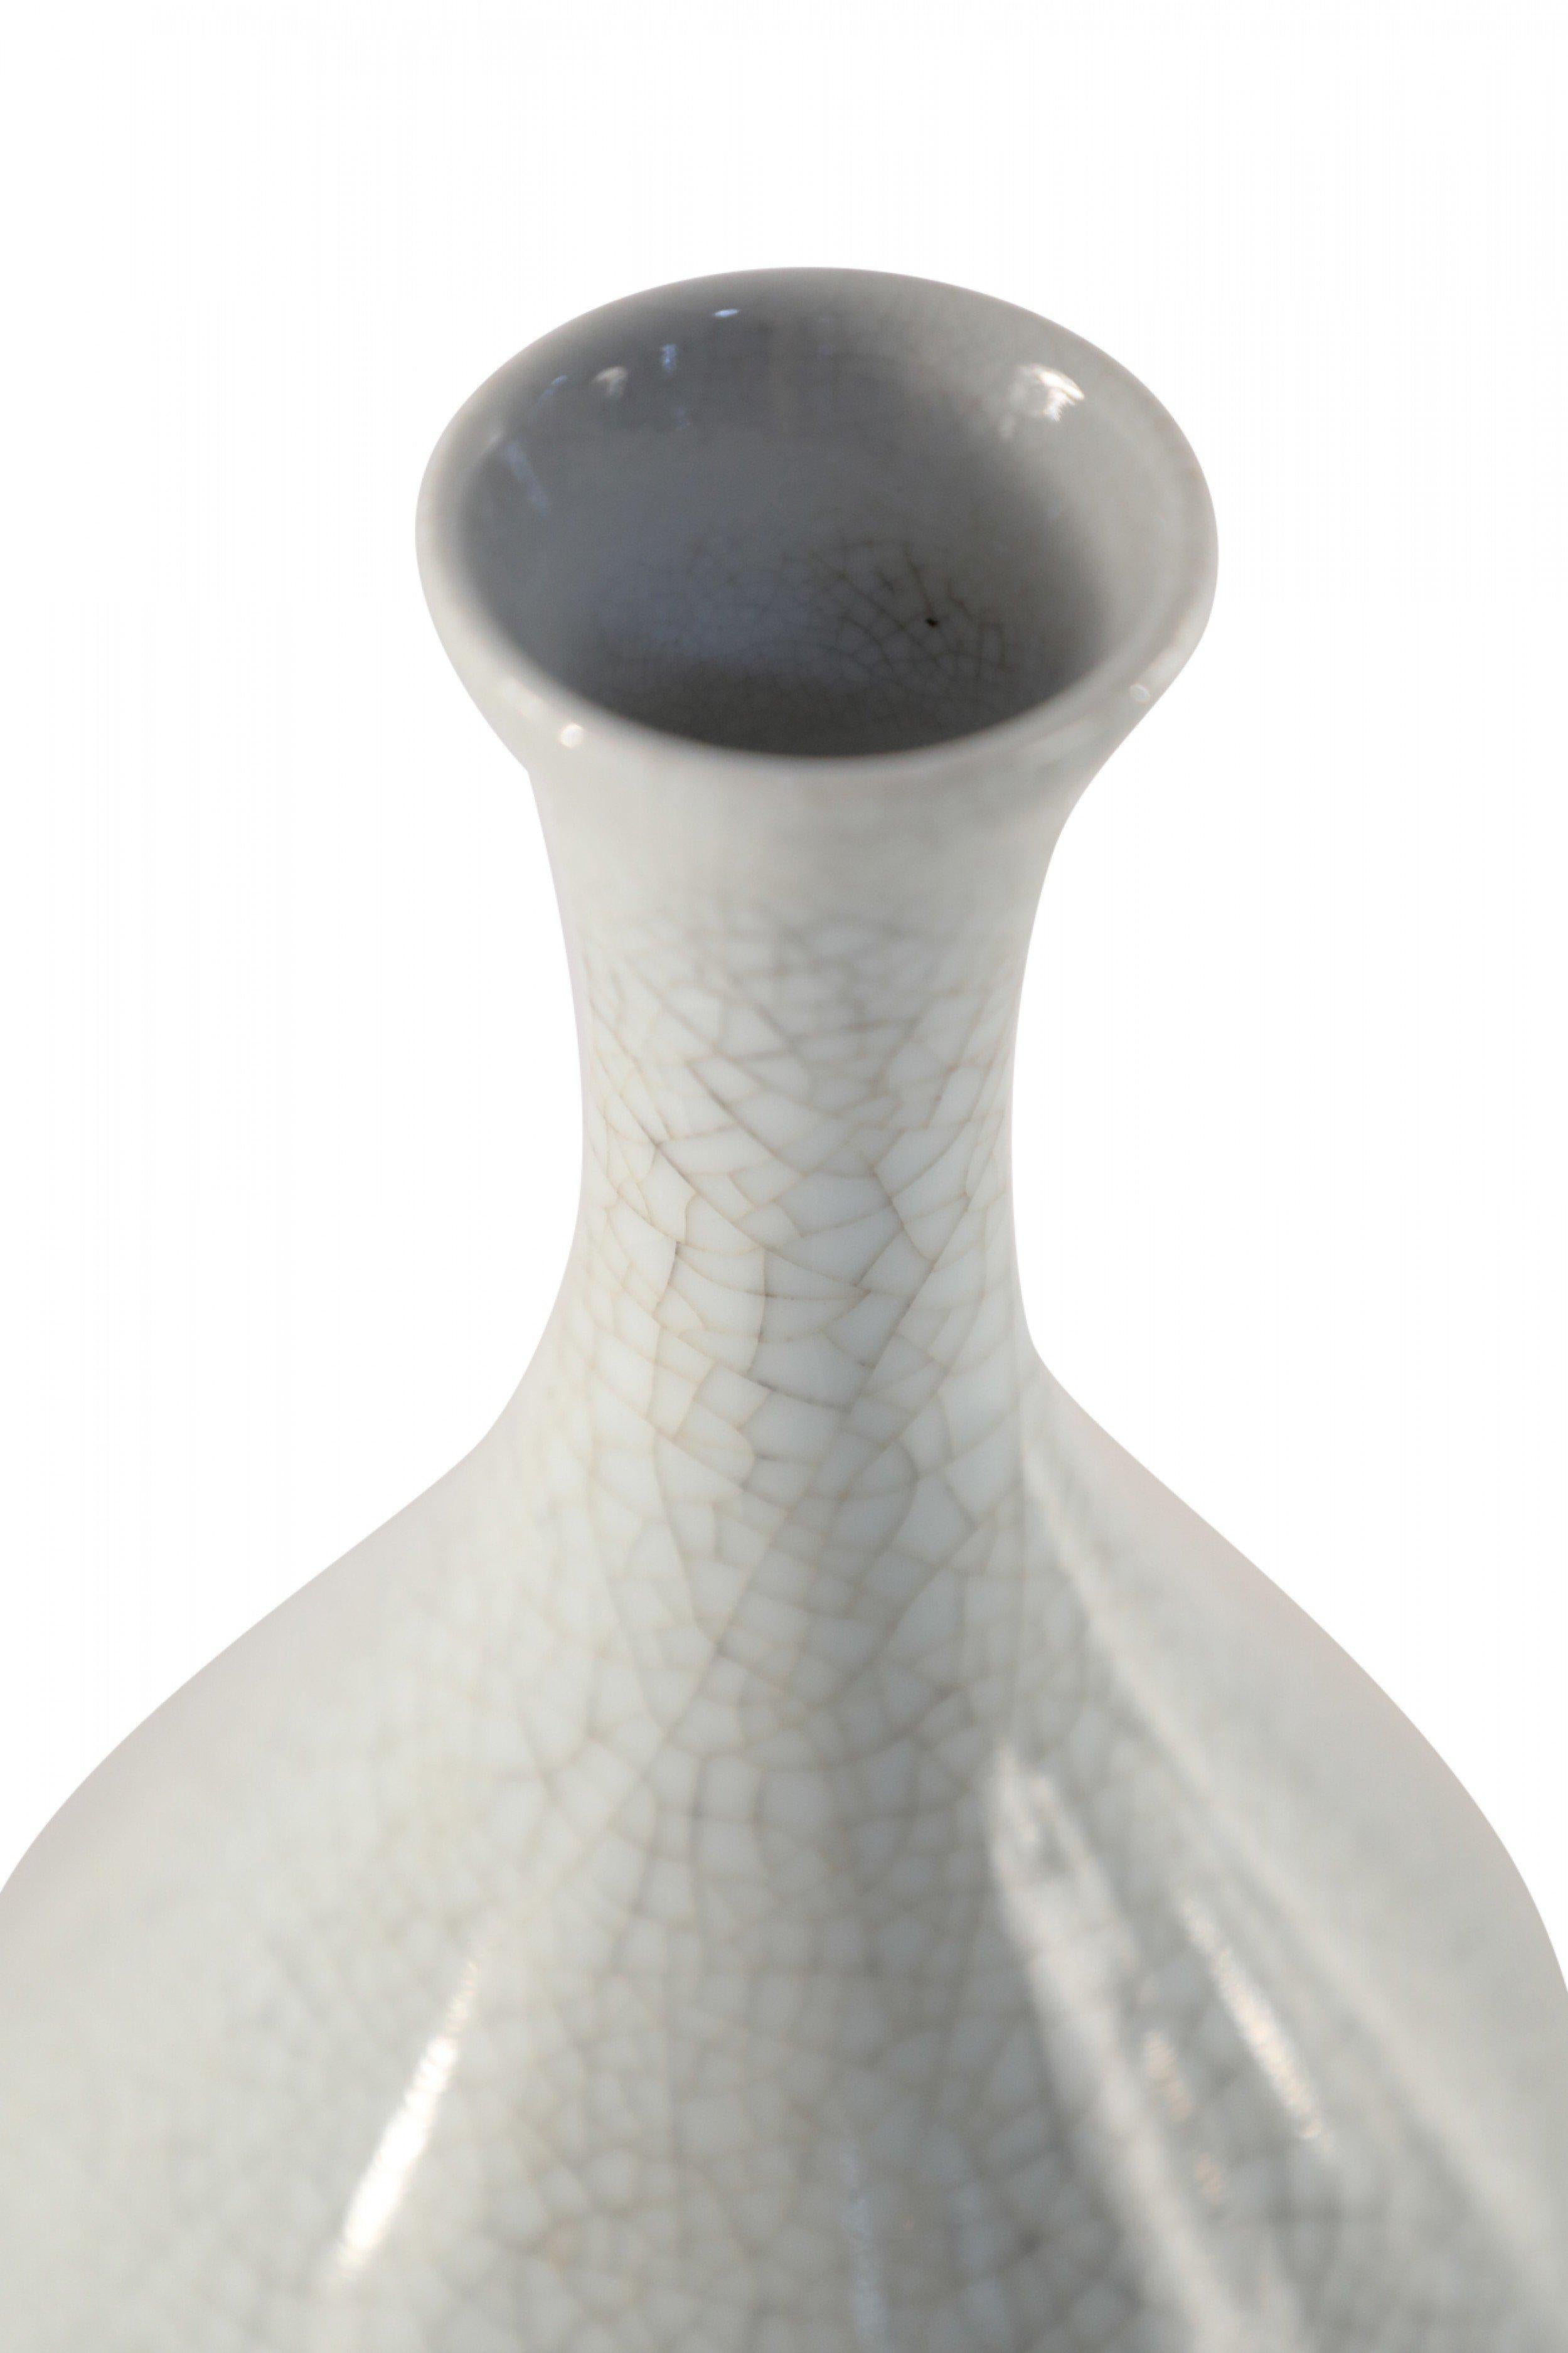 Chinese teardrop-shaped porcelain vase with an off-white crackle finish, a fluted opening and a hole in the base.
   